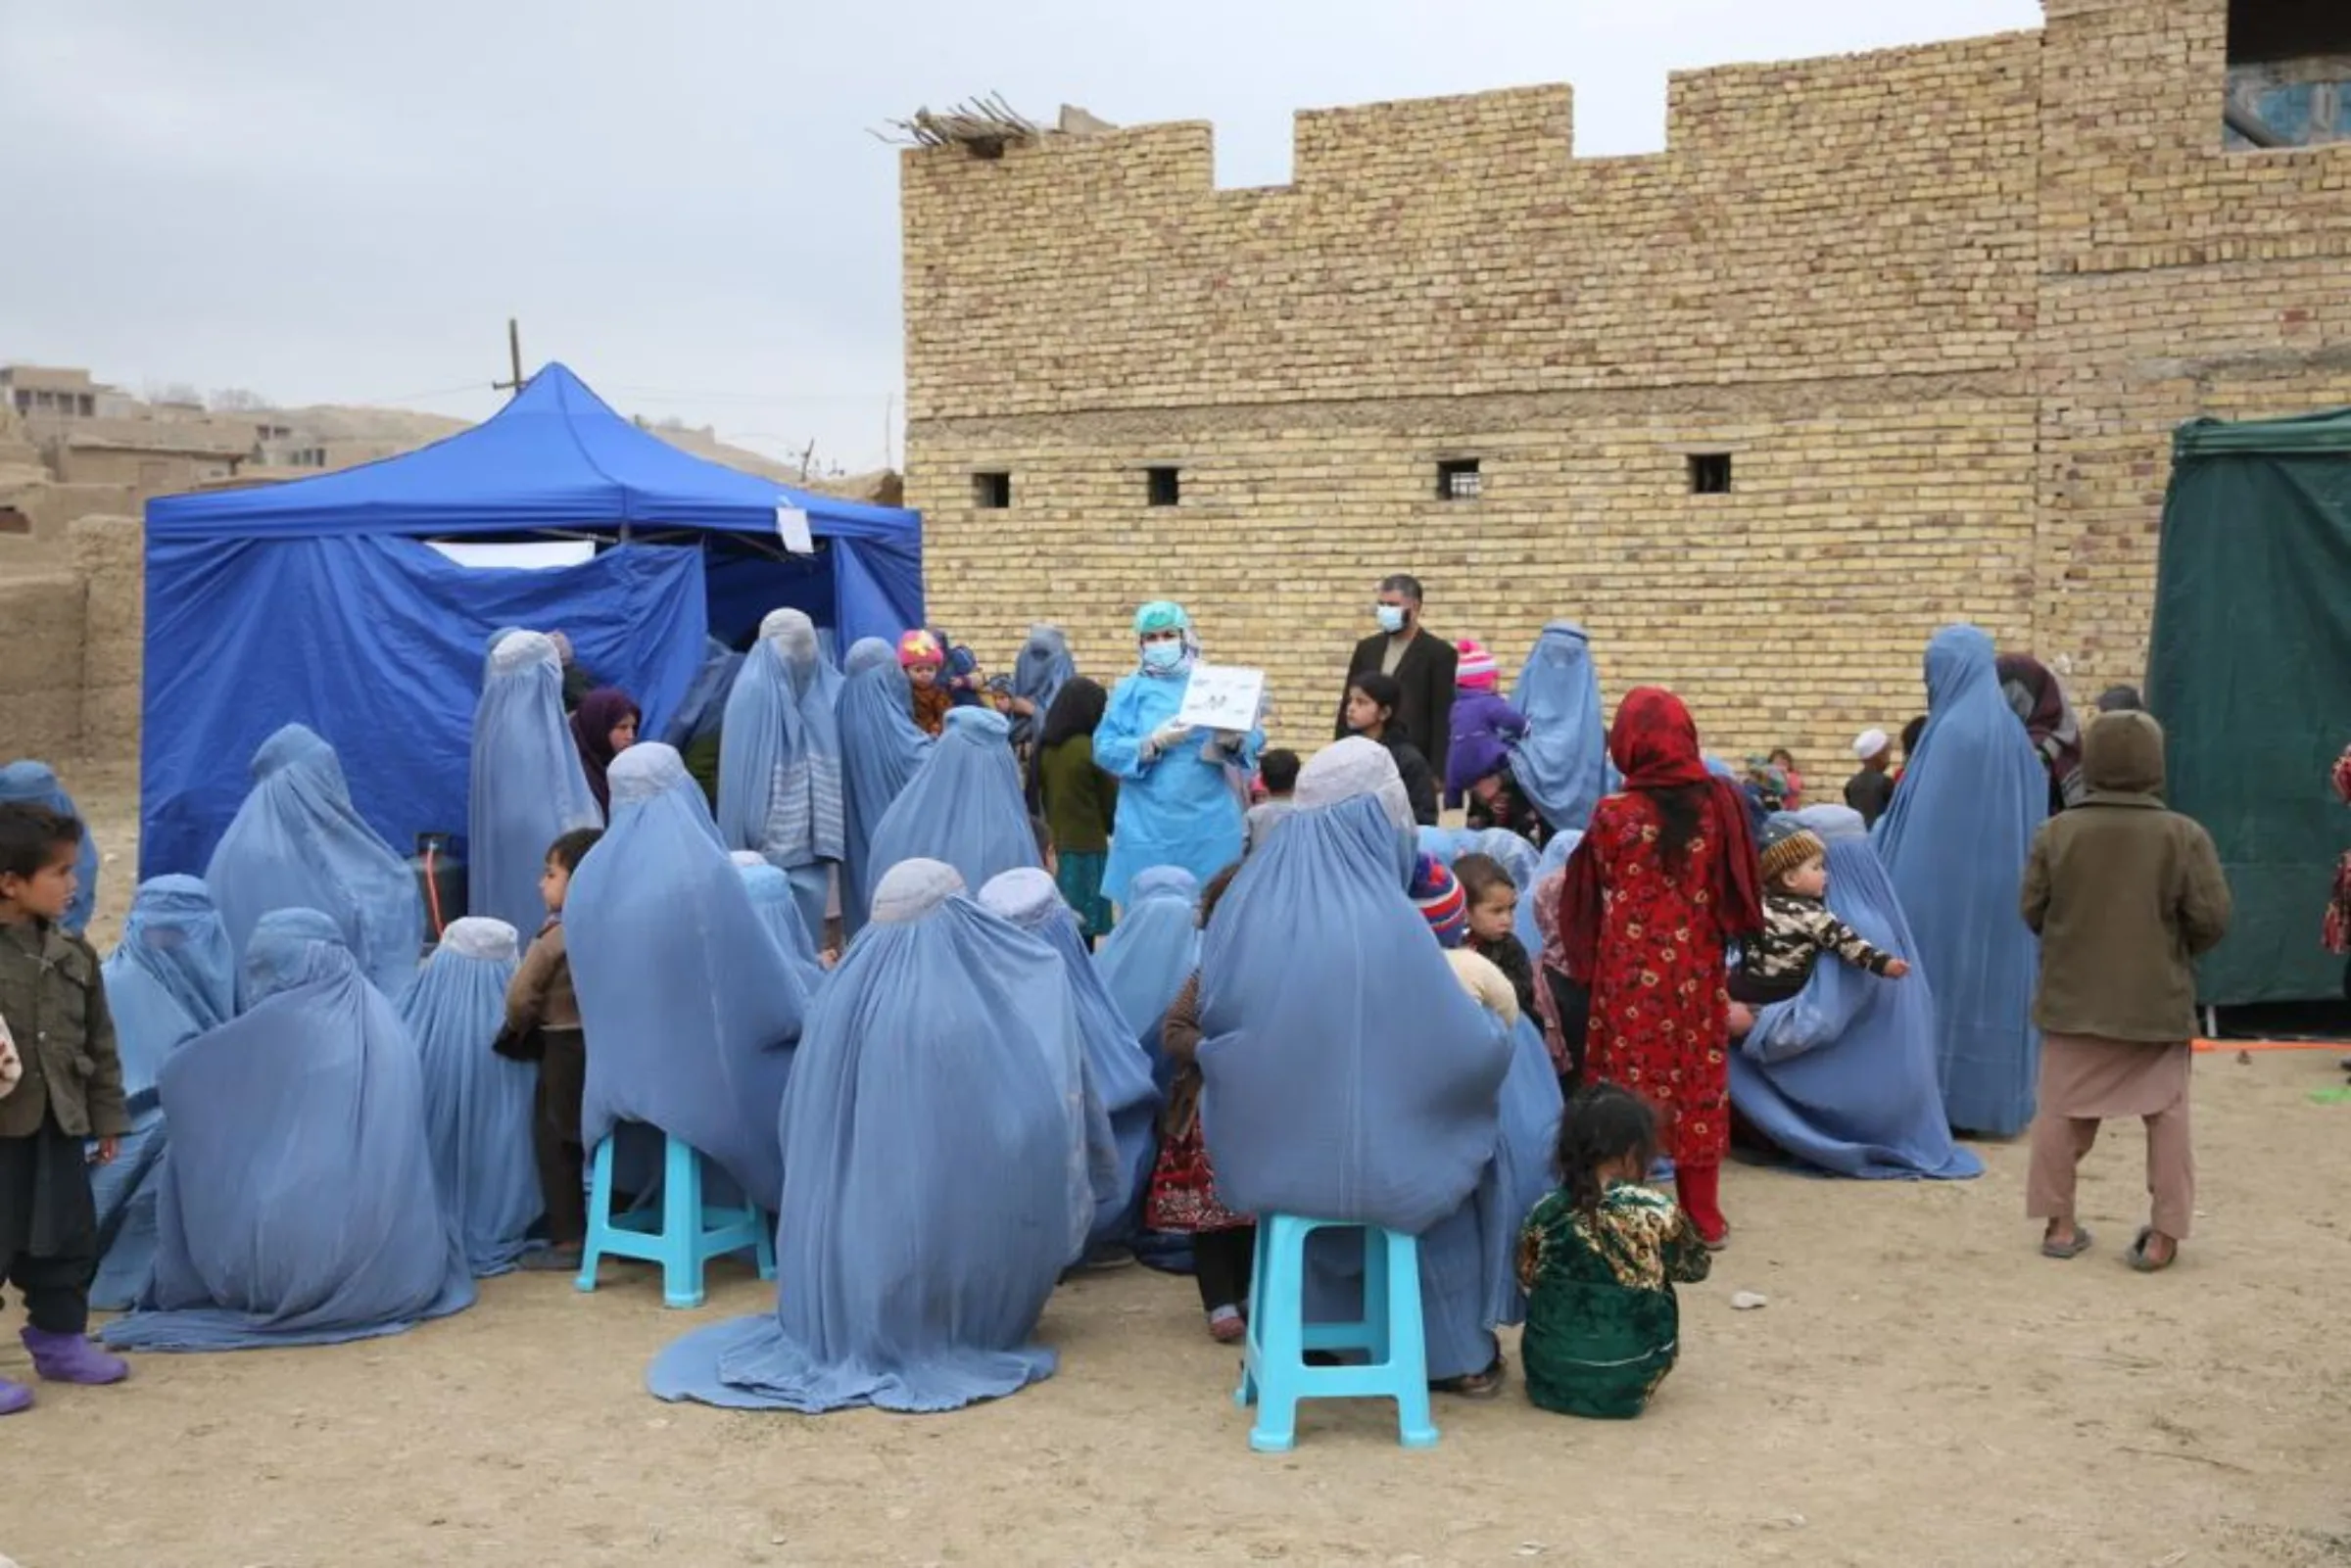 Women and children wait outside a mobile health clinic in Faryab Province, Afghanistan, February 21, 2022